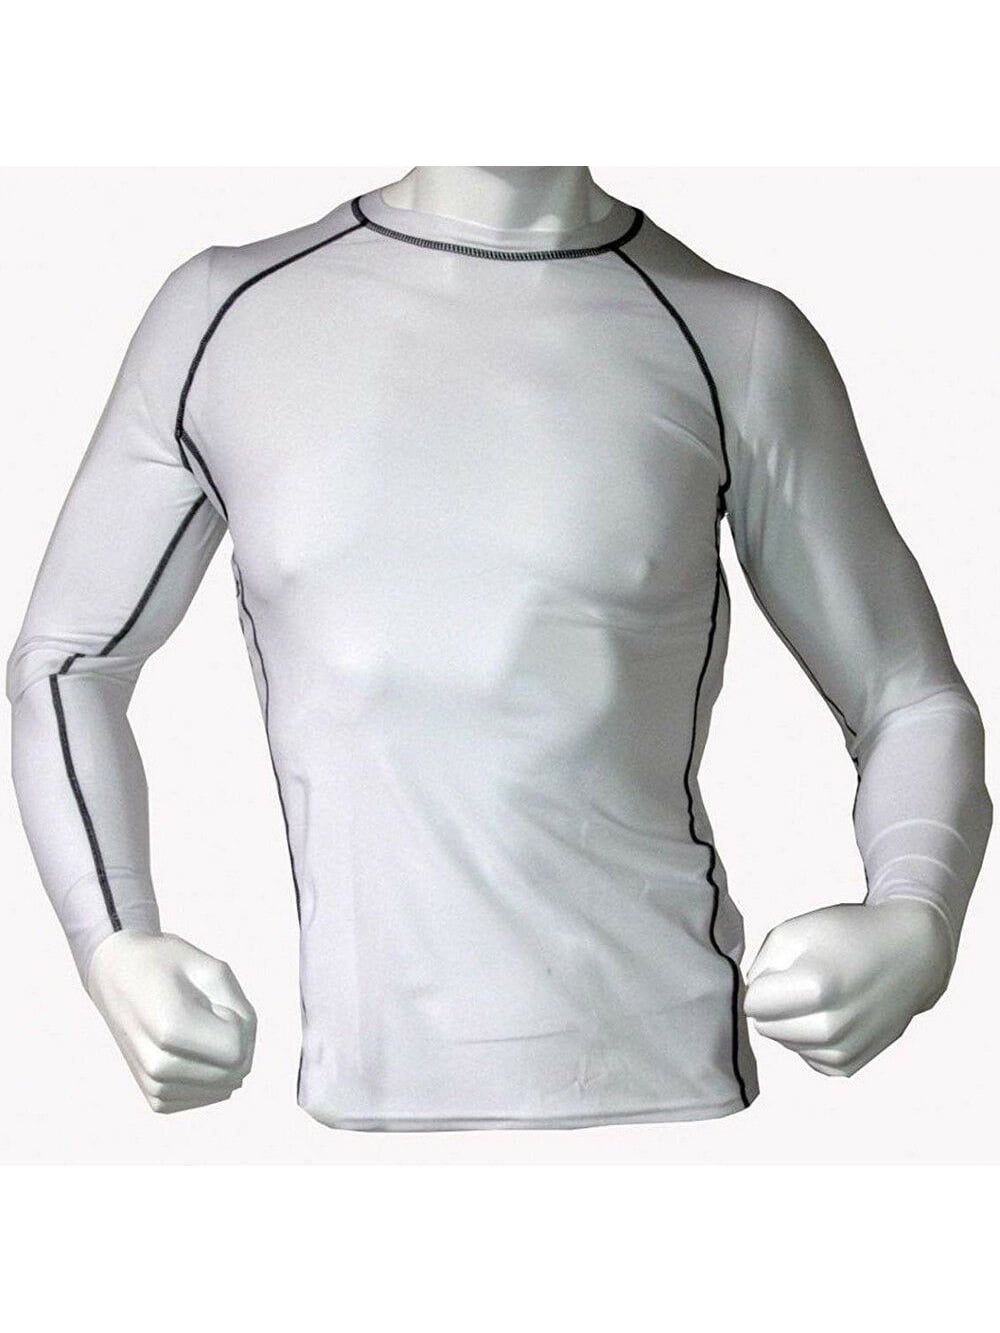 Mens Boys Body Armour Compression Base layers Thermal Under Shirt Top Skins Gym